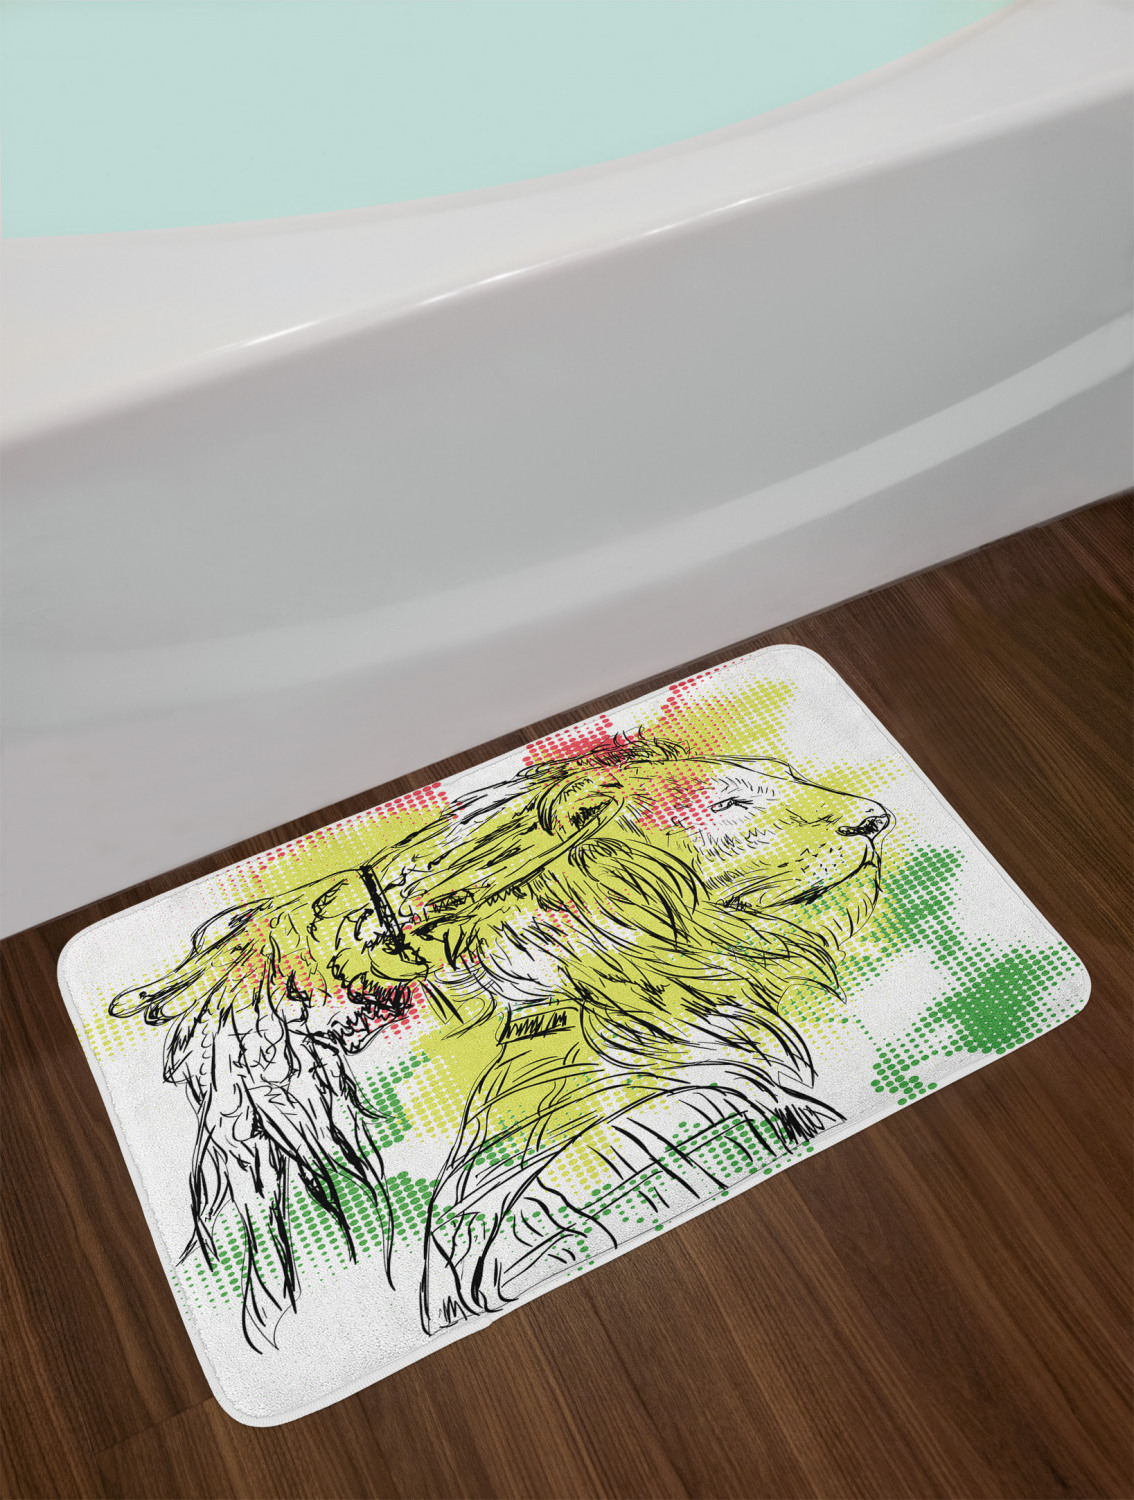 Rasta Bath Mat, Black and White Sketchy Head of Lion on Digital Pixels Backdrop Image, Non-Slip Plush Mat Bathroom Kitchen Laundry Room Decor, 29.5 X 17.5 Inches, Green Burgundy and Yellow, Ambesonne - image 2 of 2